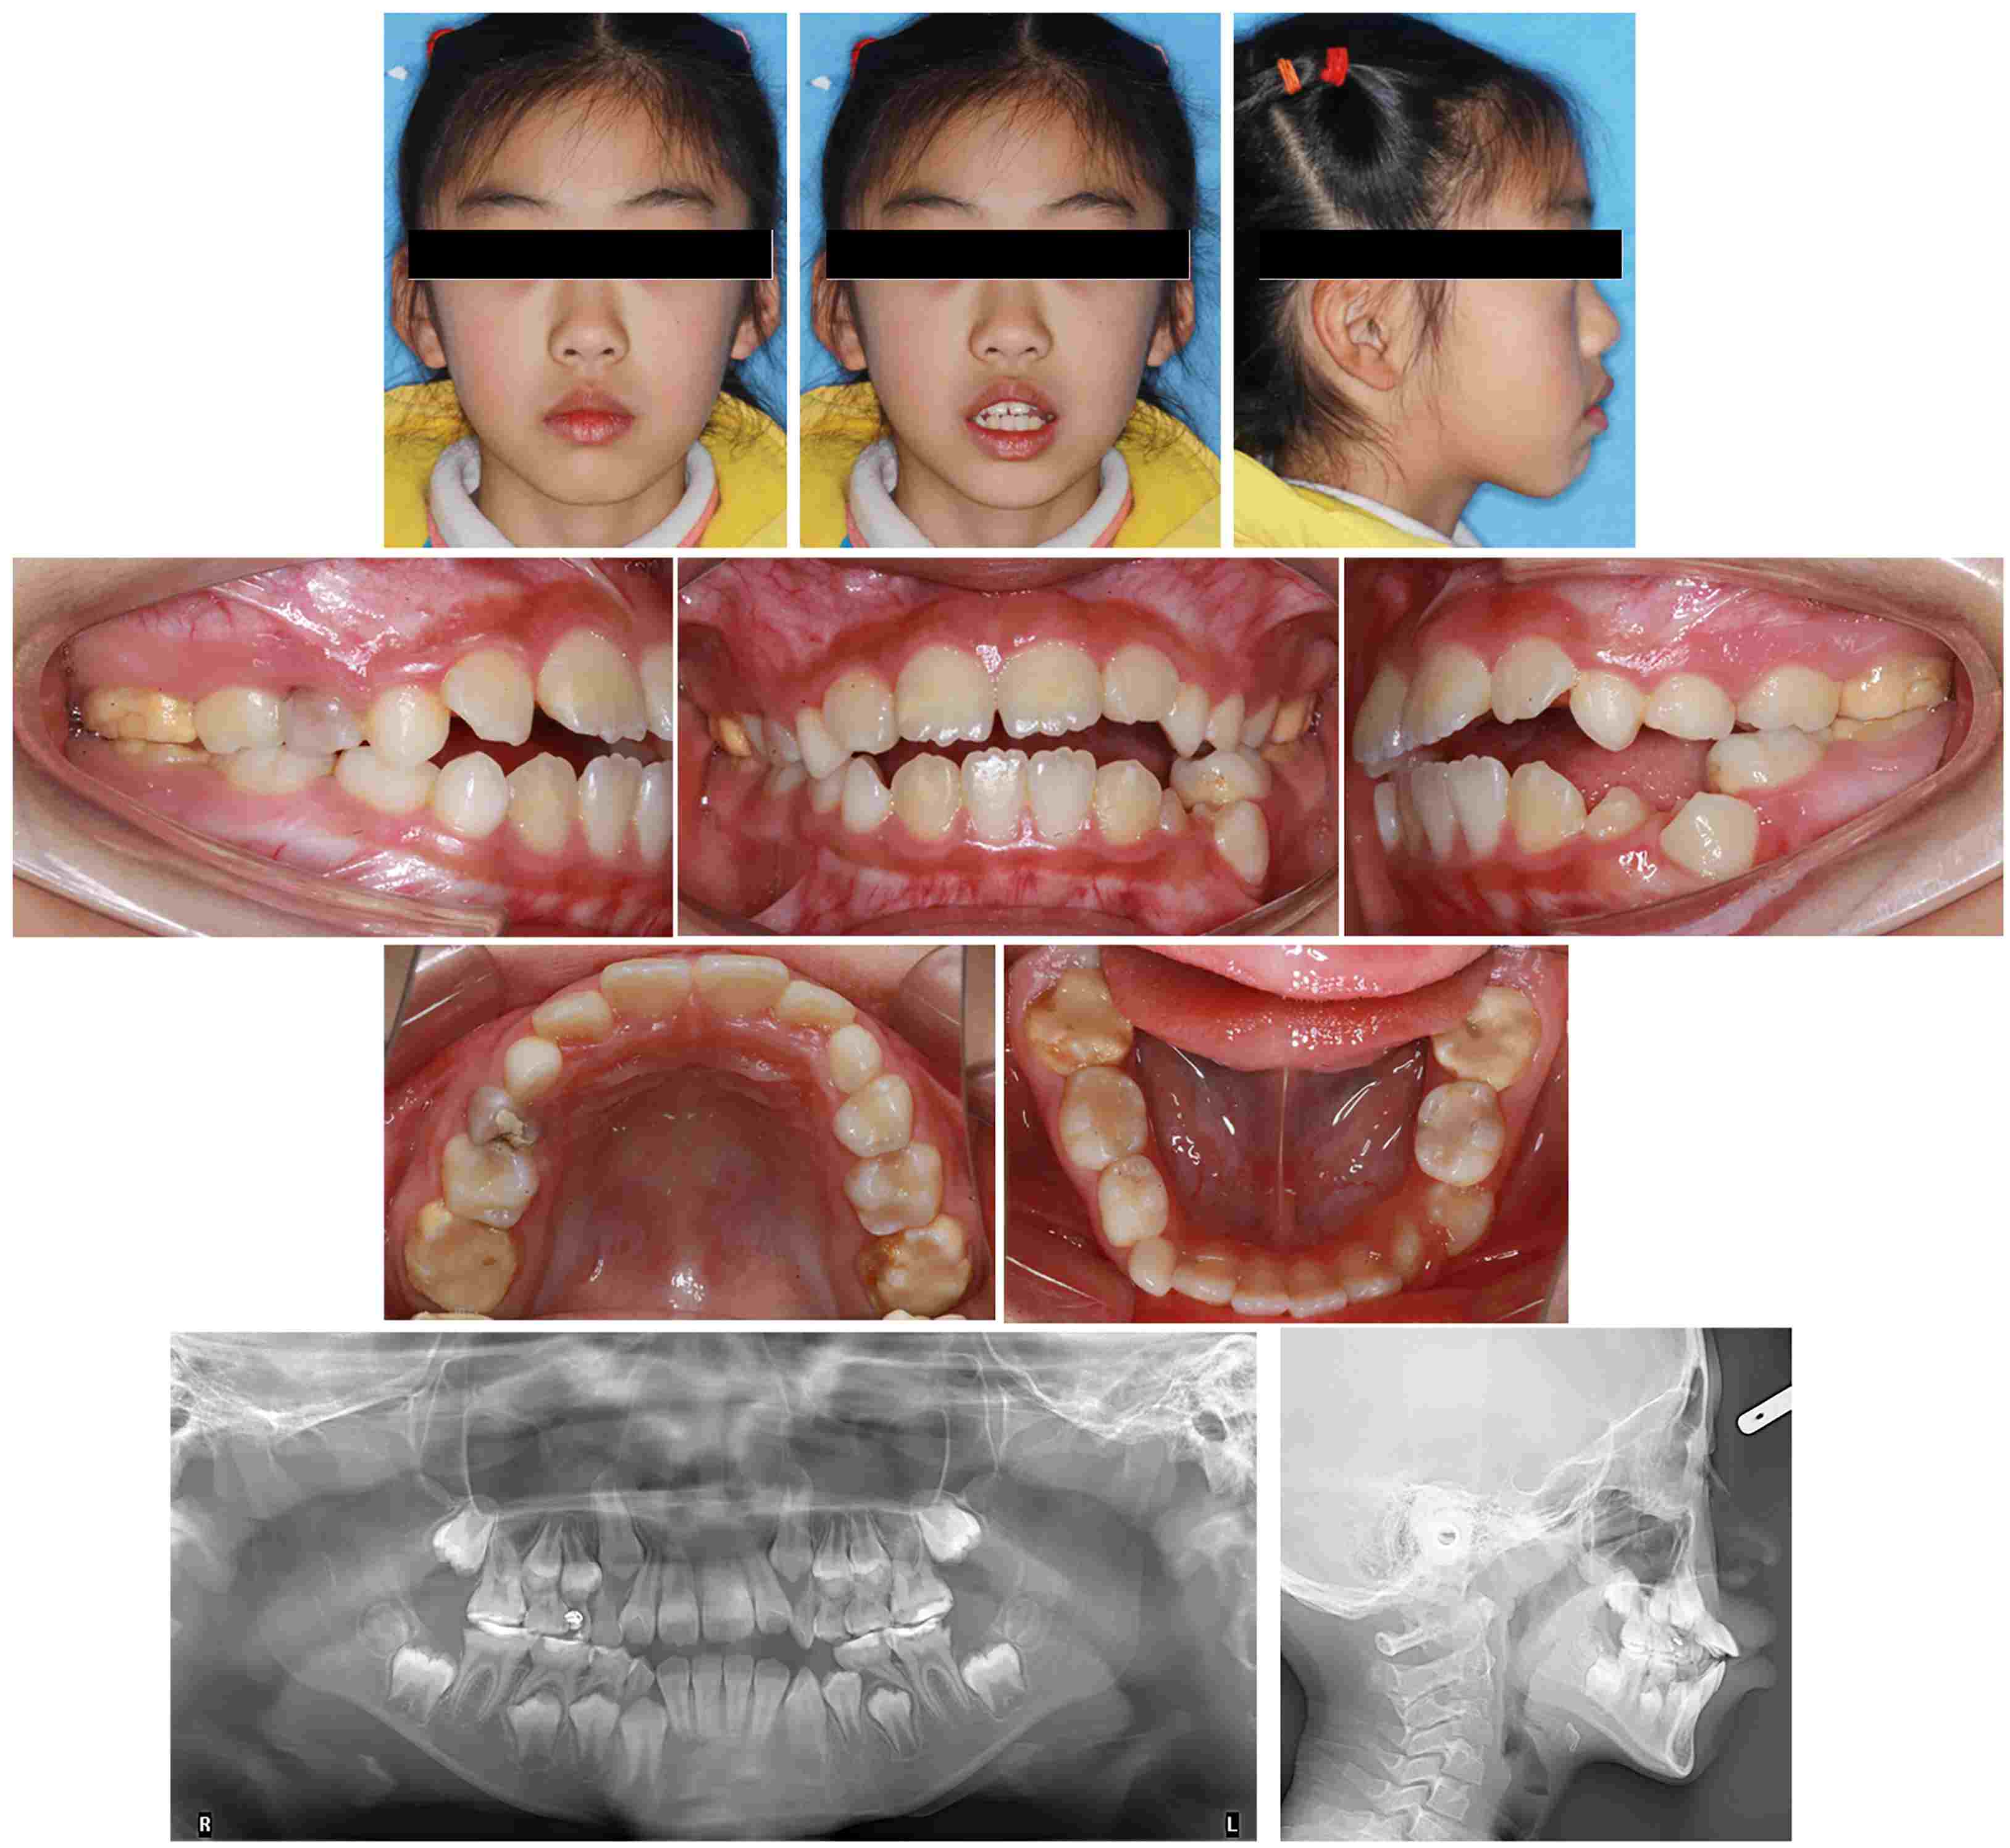 Journal of Clinical Pediatric Dentistry (JOCPD)